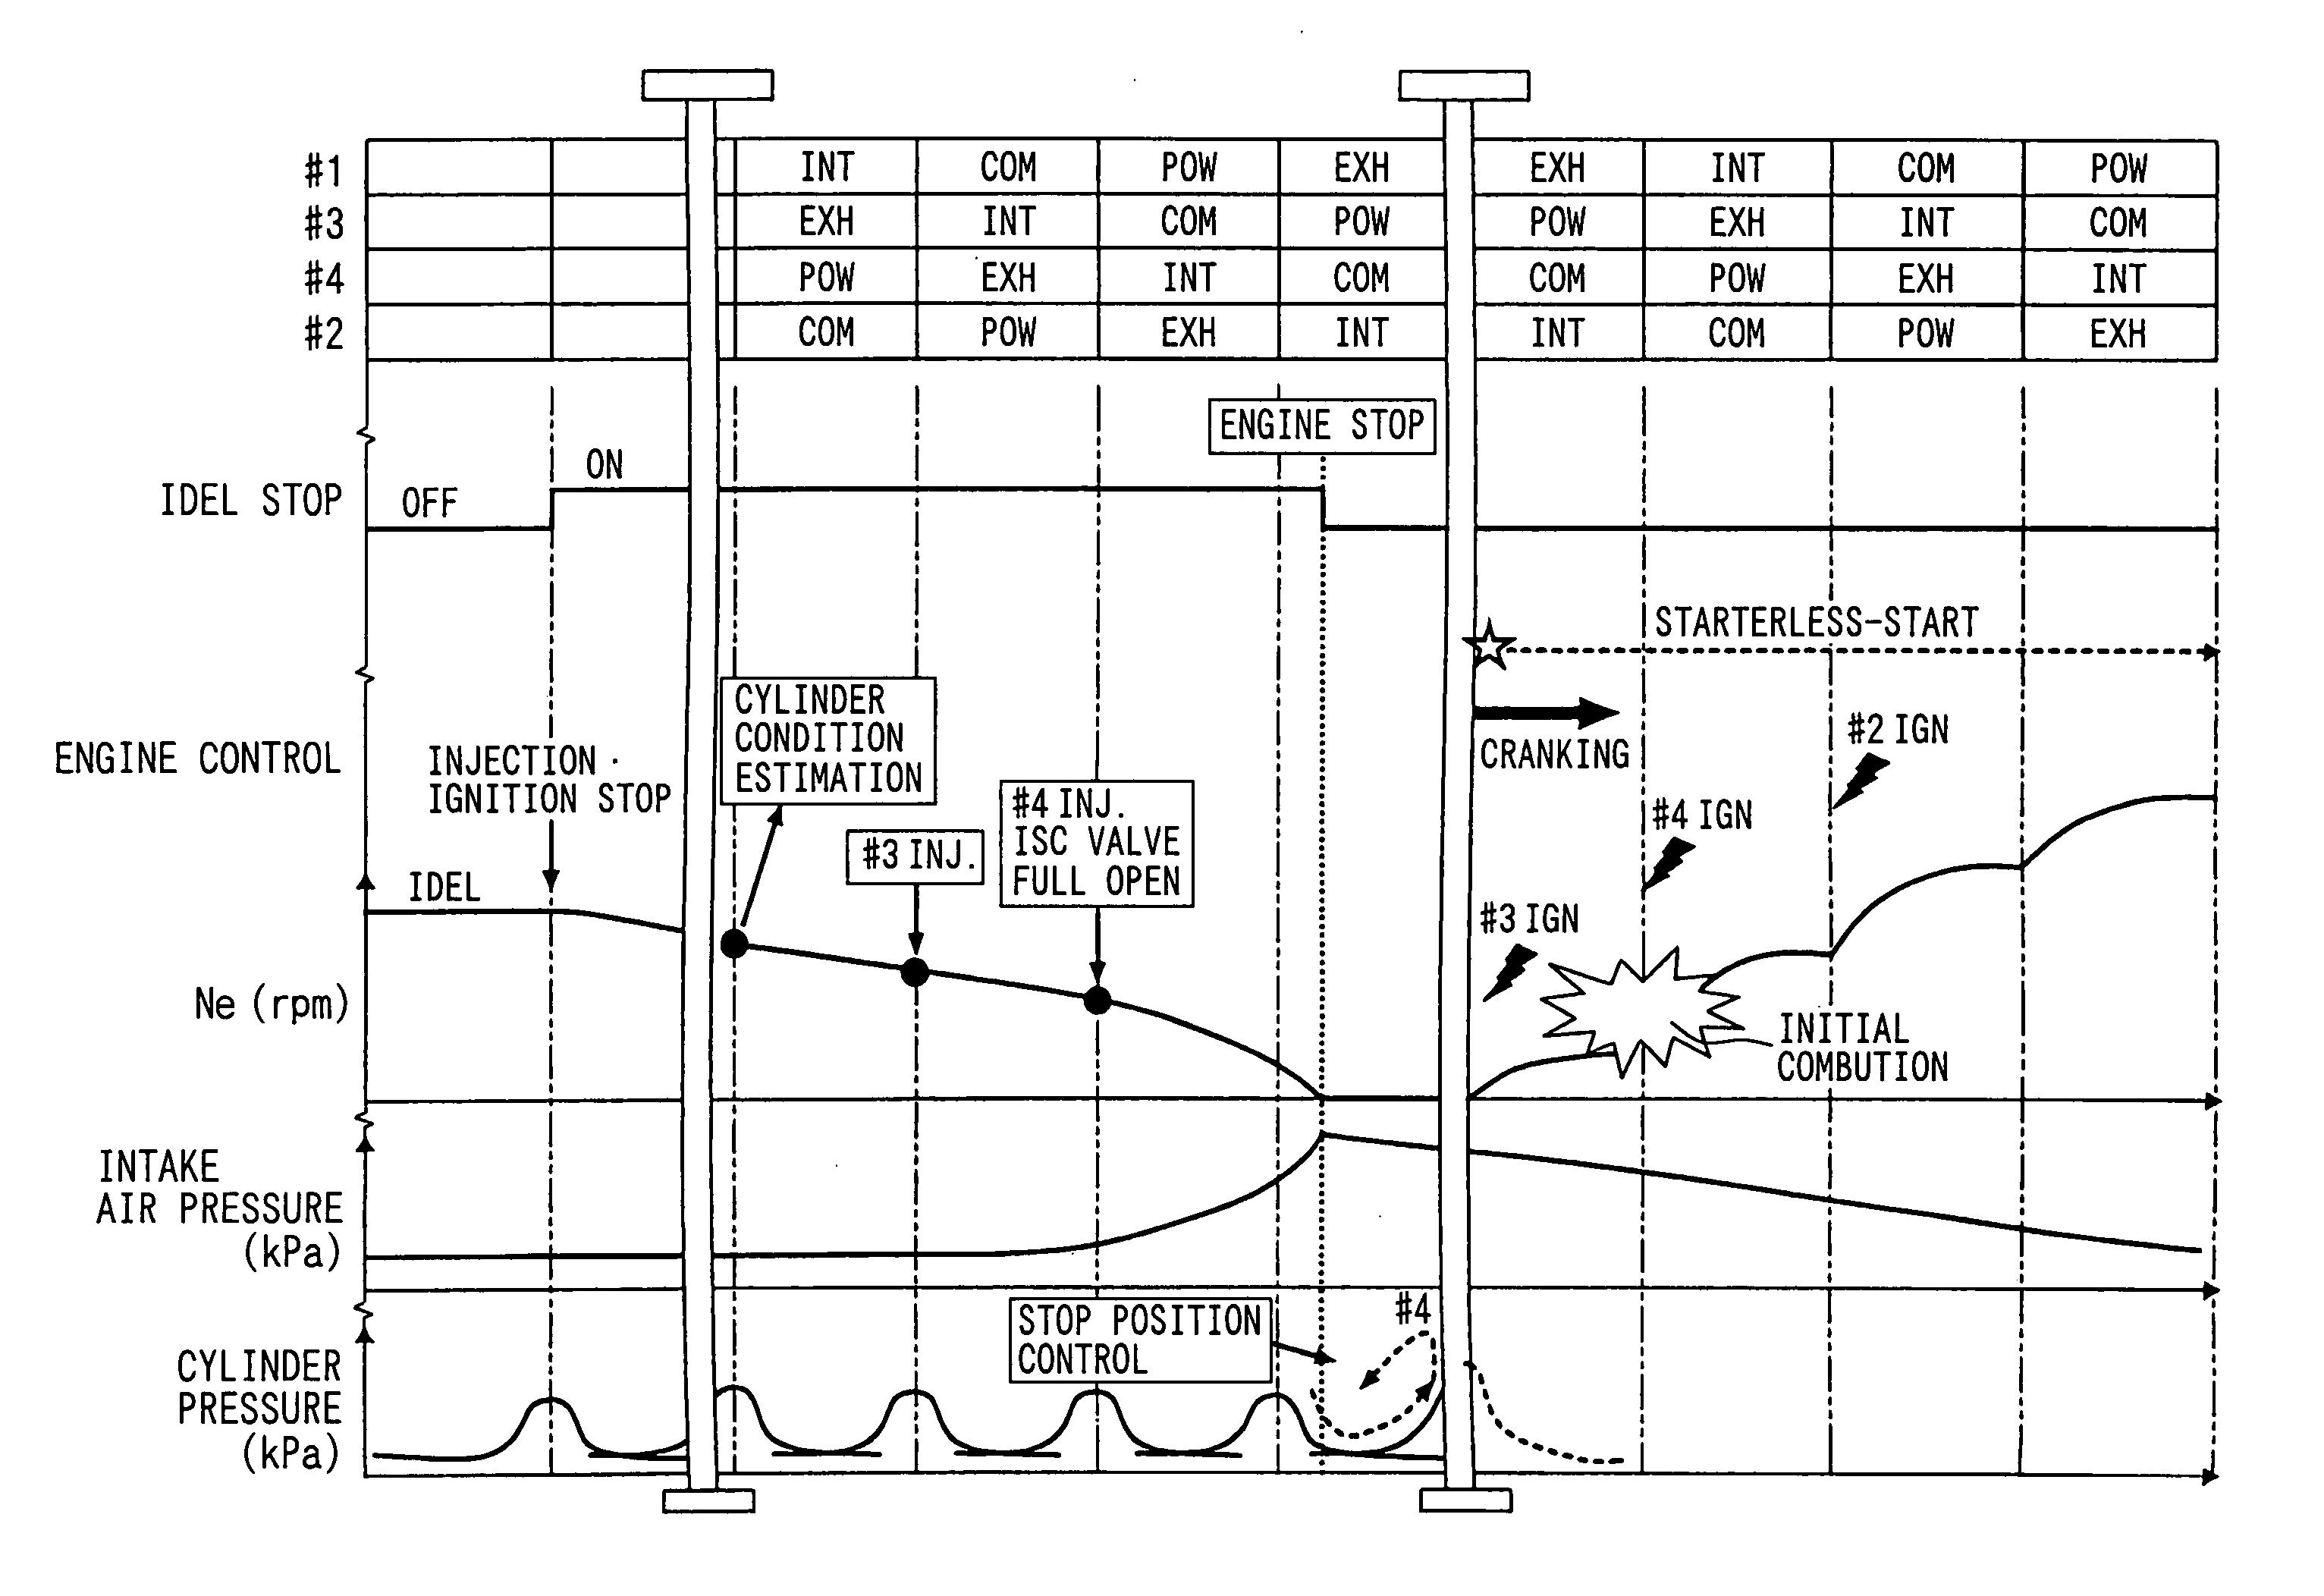 Engine controller for starting and stopping engine